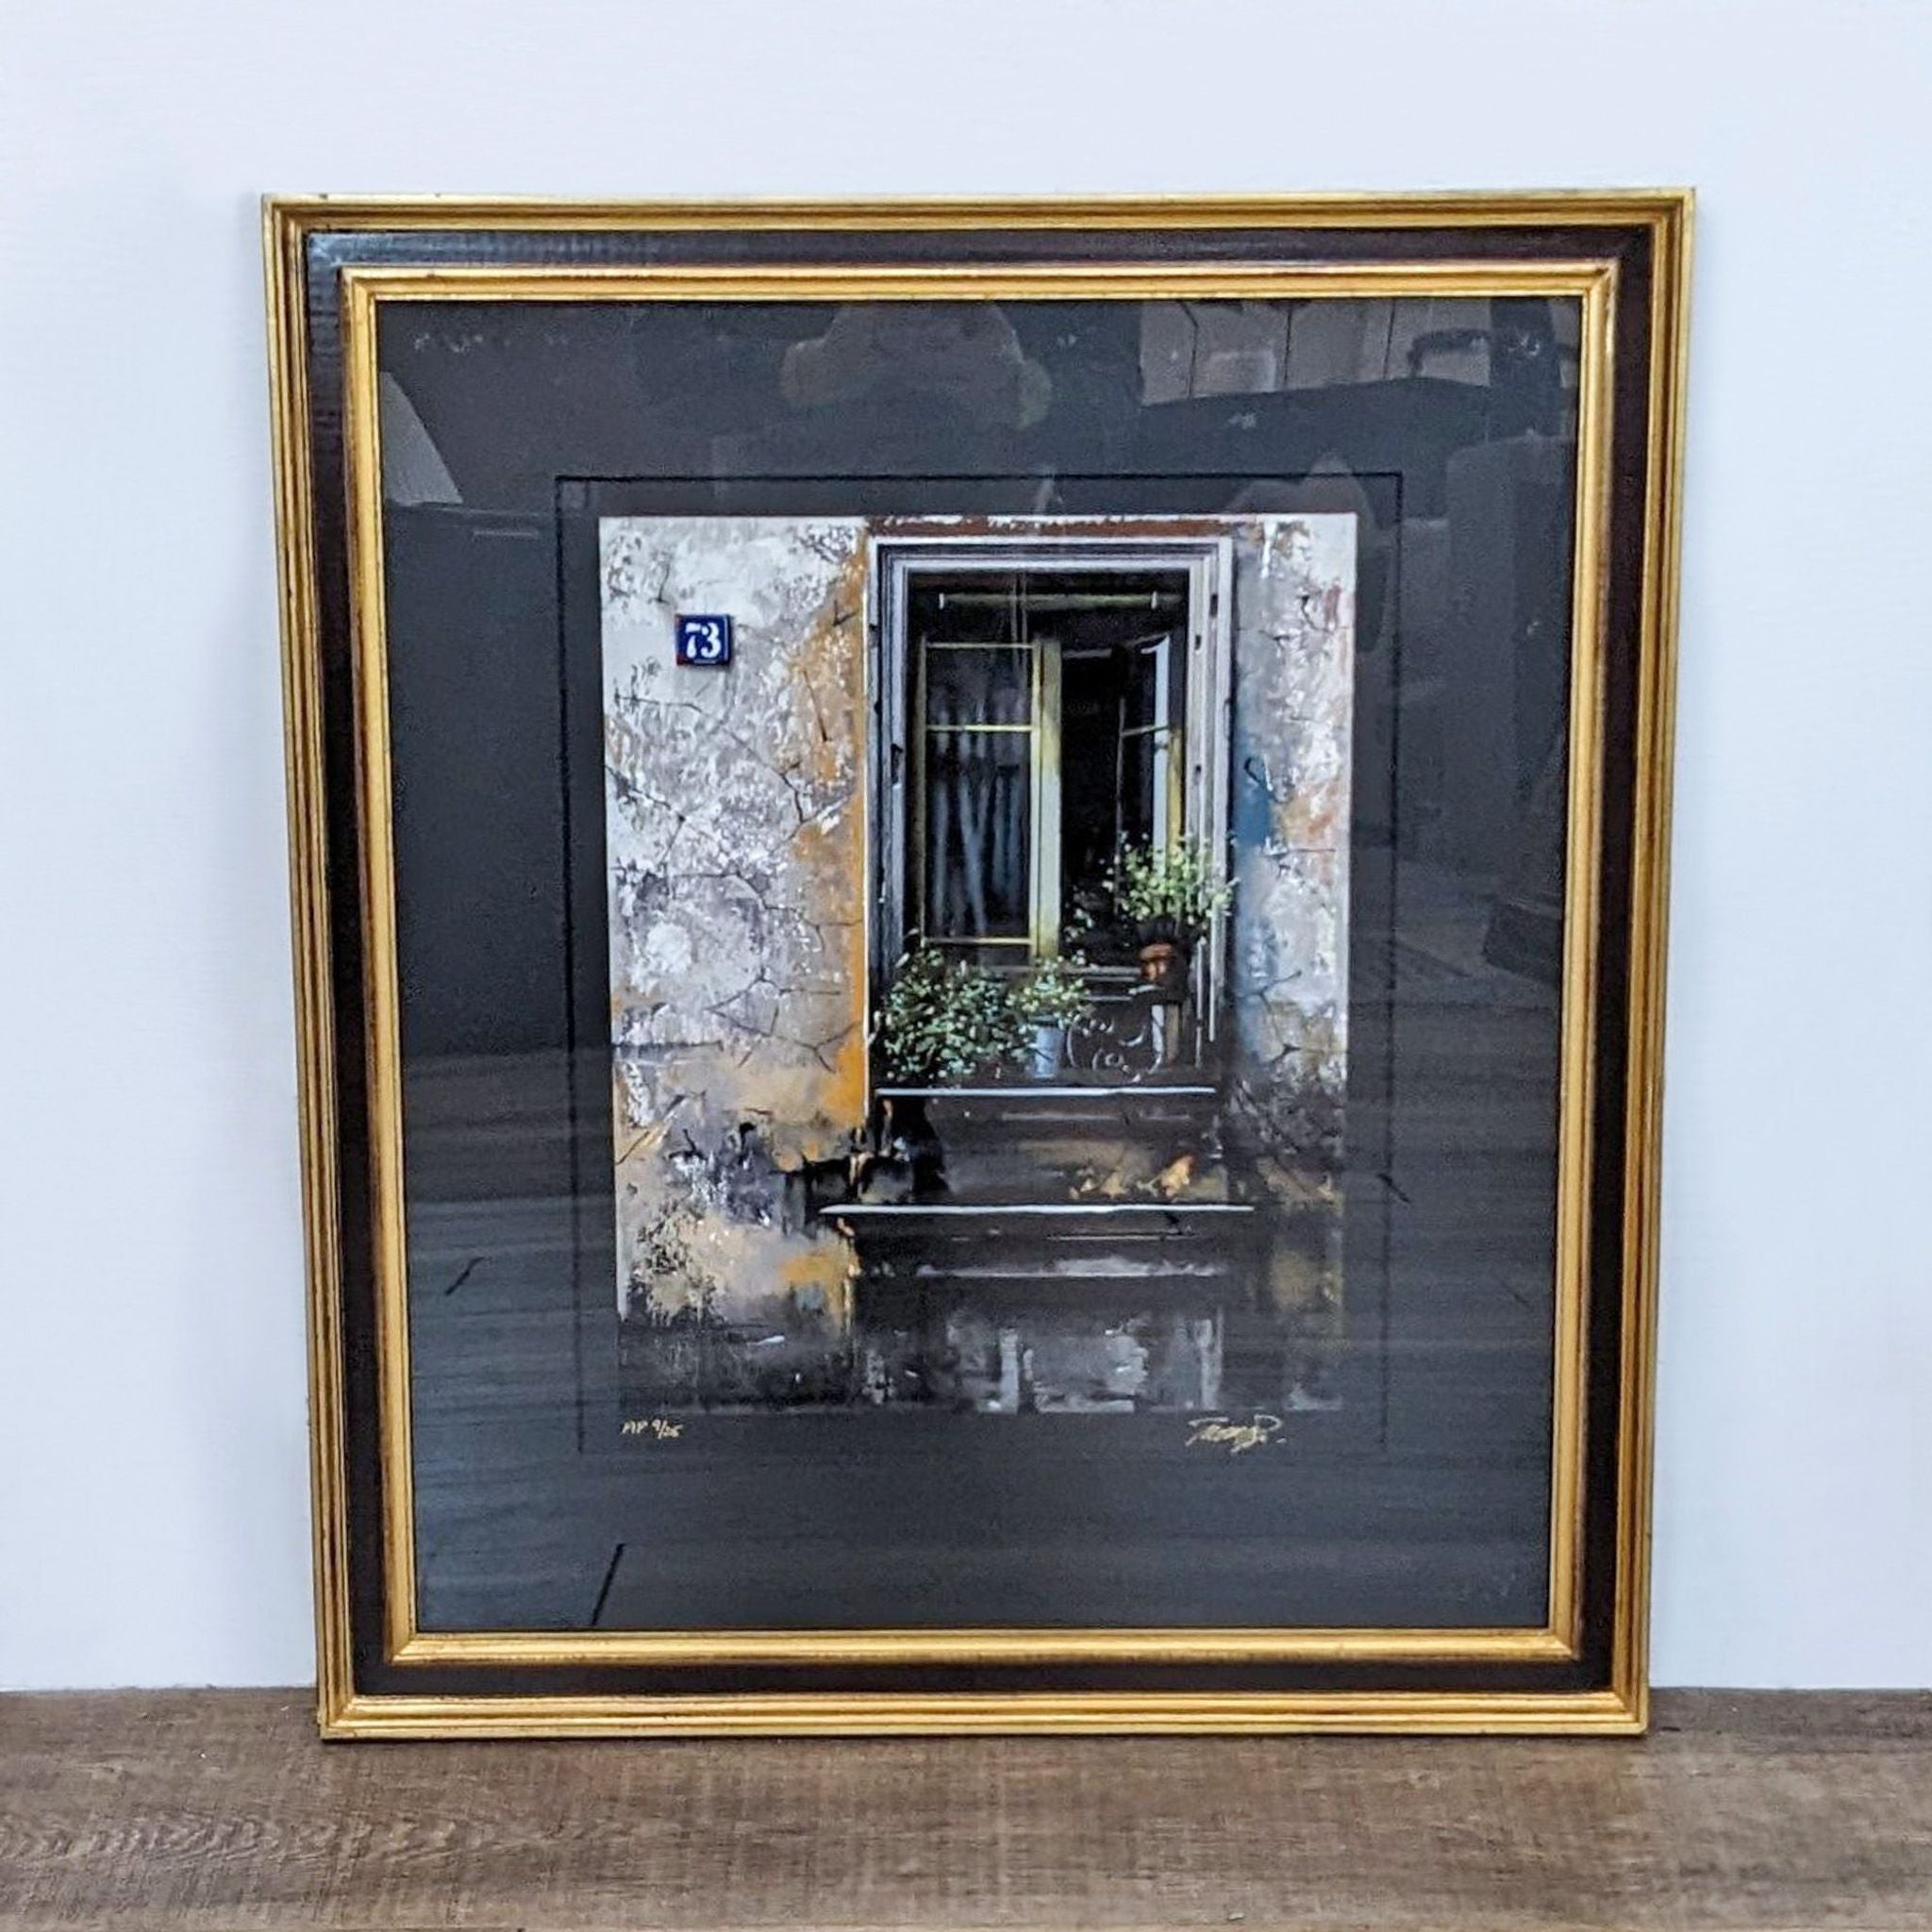 Alt text 1: "Limited edition serigraph print of a weathered building window numbered 9/25 by Thomas Pradzynski, framed in gold, from Reperch."